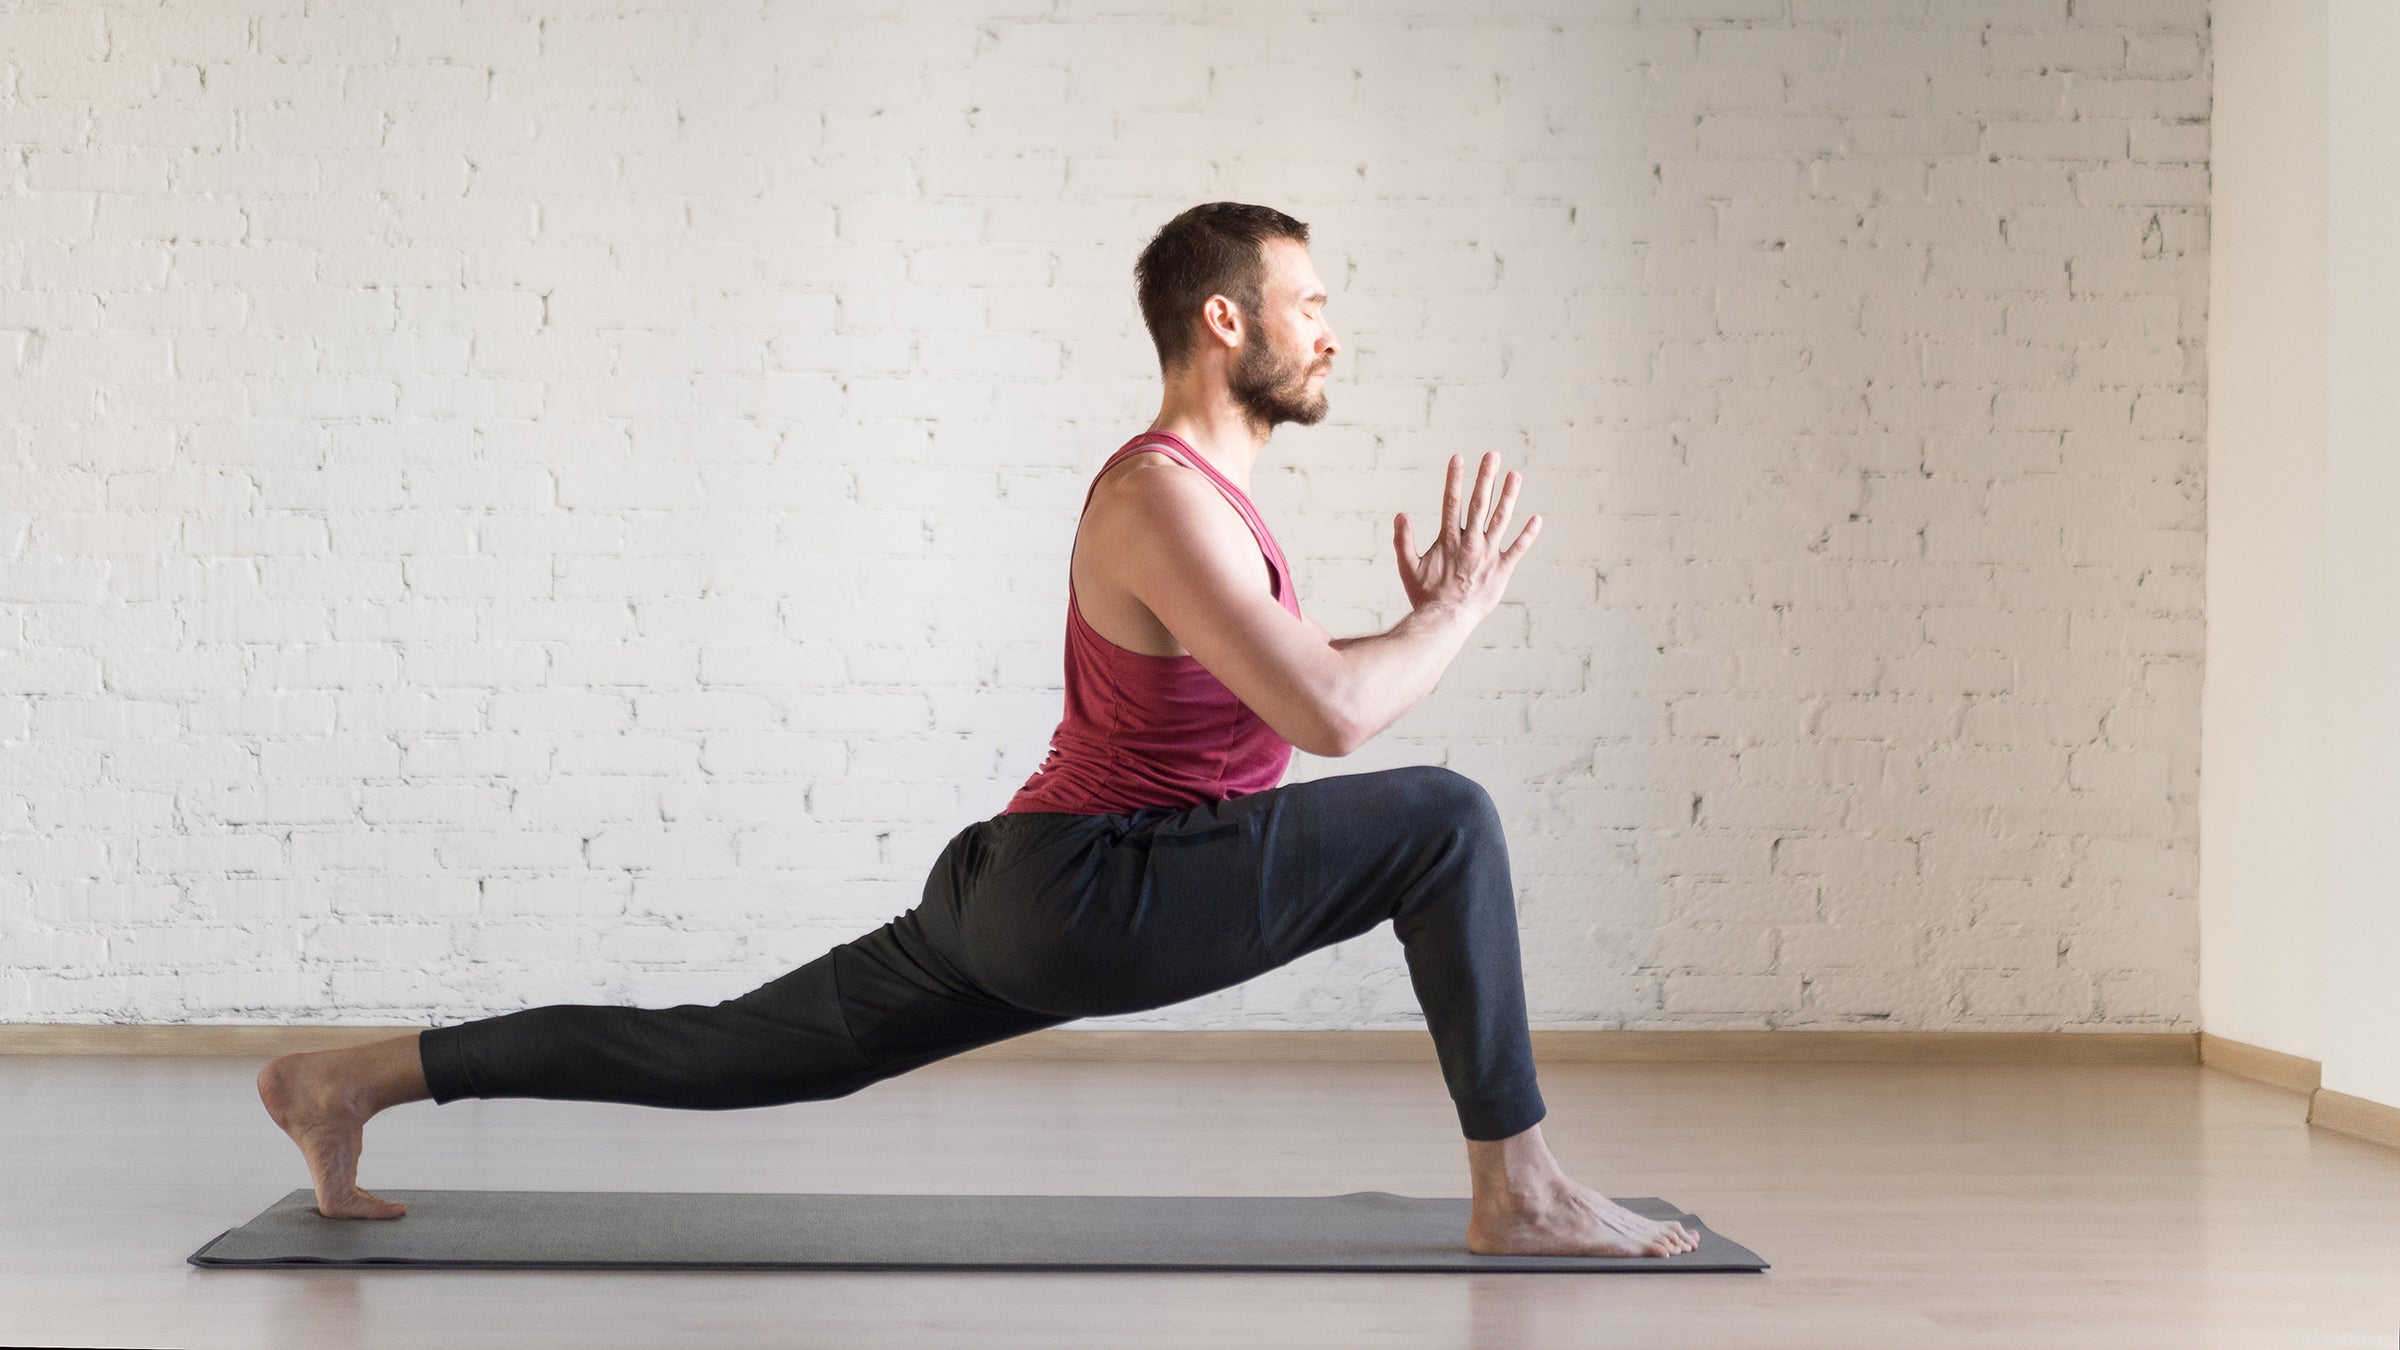 Do yoga everyday without the fear of personal injury